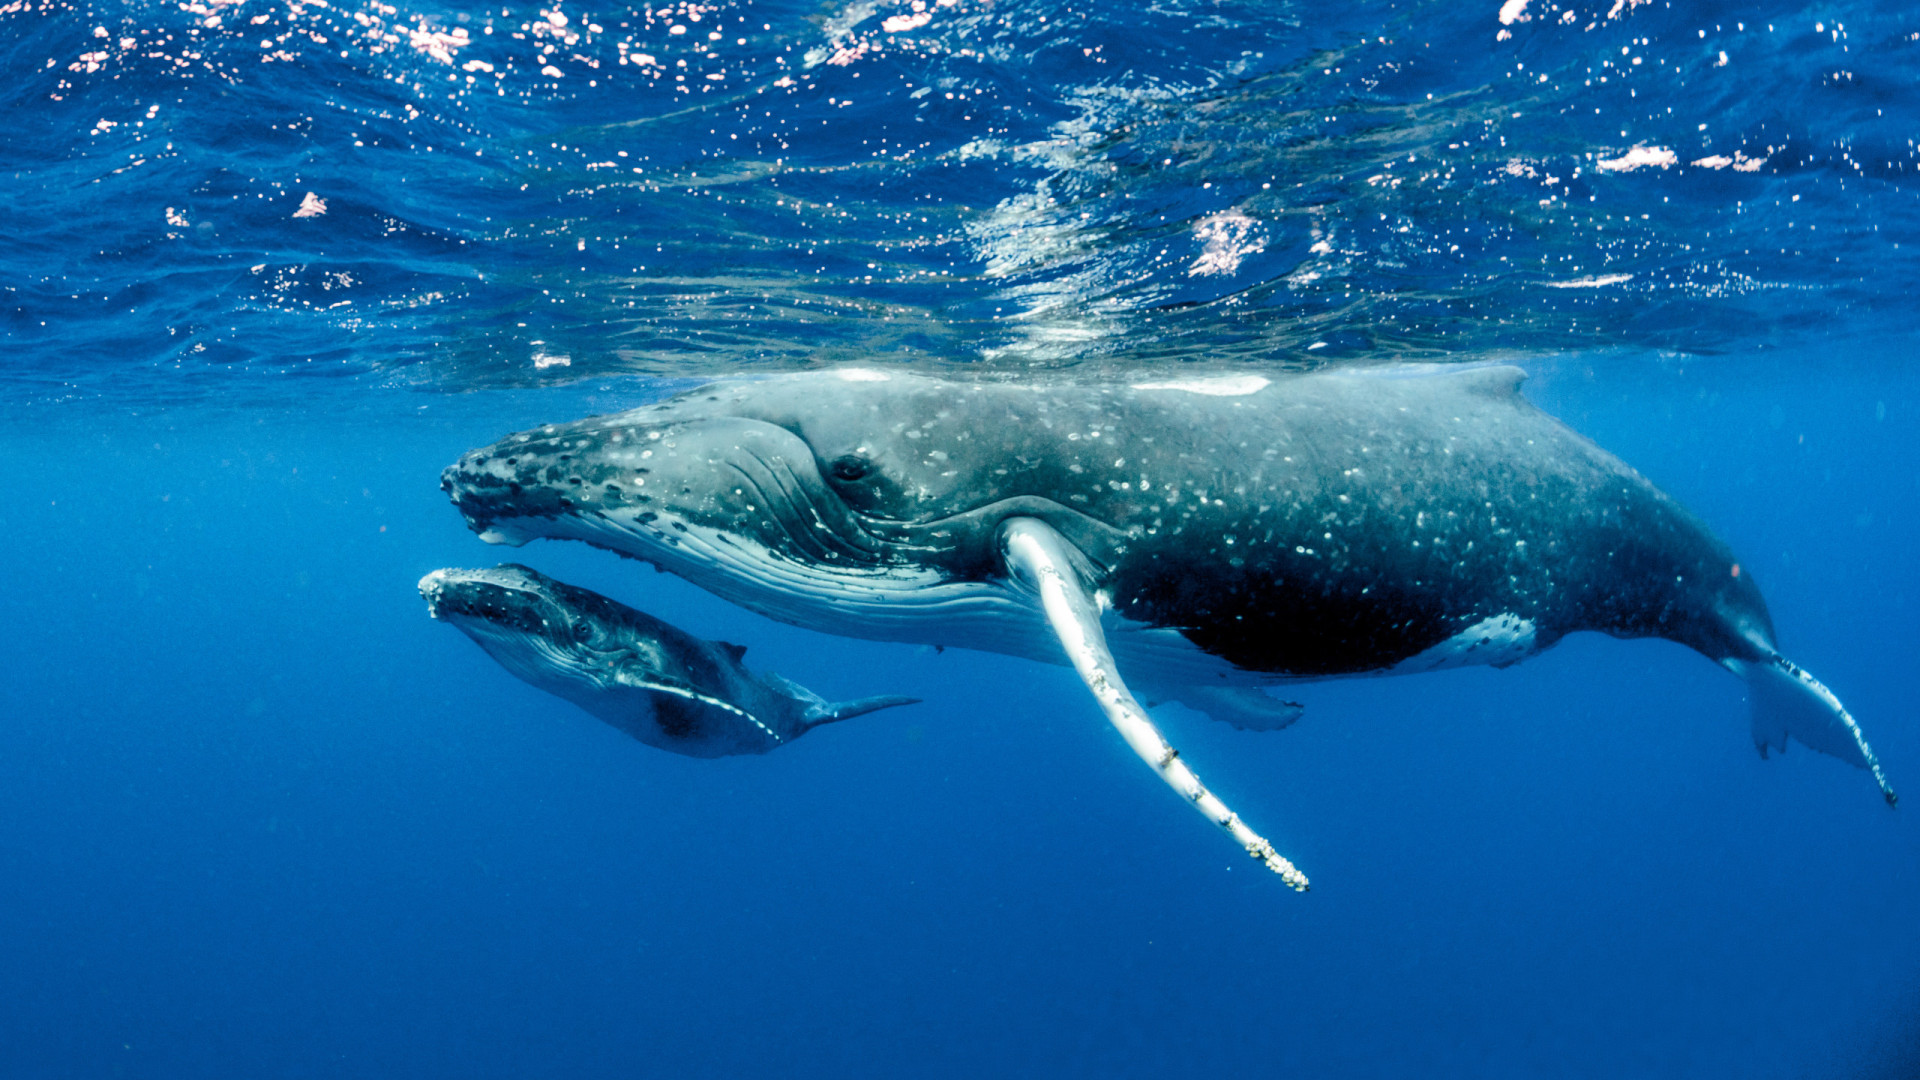 <p>They are known to attack young humpback whales by separating the baby from the mother and then delivering continuous blows on the young whale until it dies.</p><p>You may also like:<a href="https://www.starsinsider.com/n/216519?utm_source=msn.com&utm_medium=display&utm_campaign=referral_description&utm_content=551403en-en_selected"> The world's most difficult languages to learn</a></p>